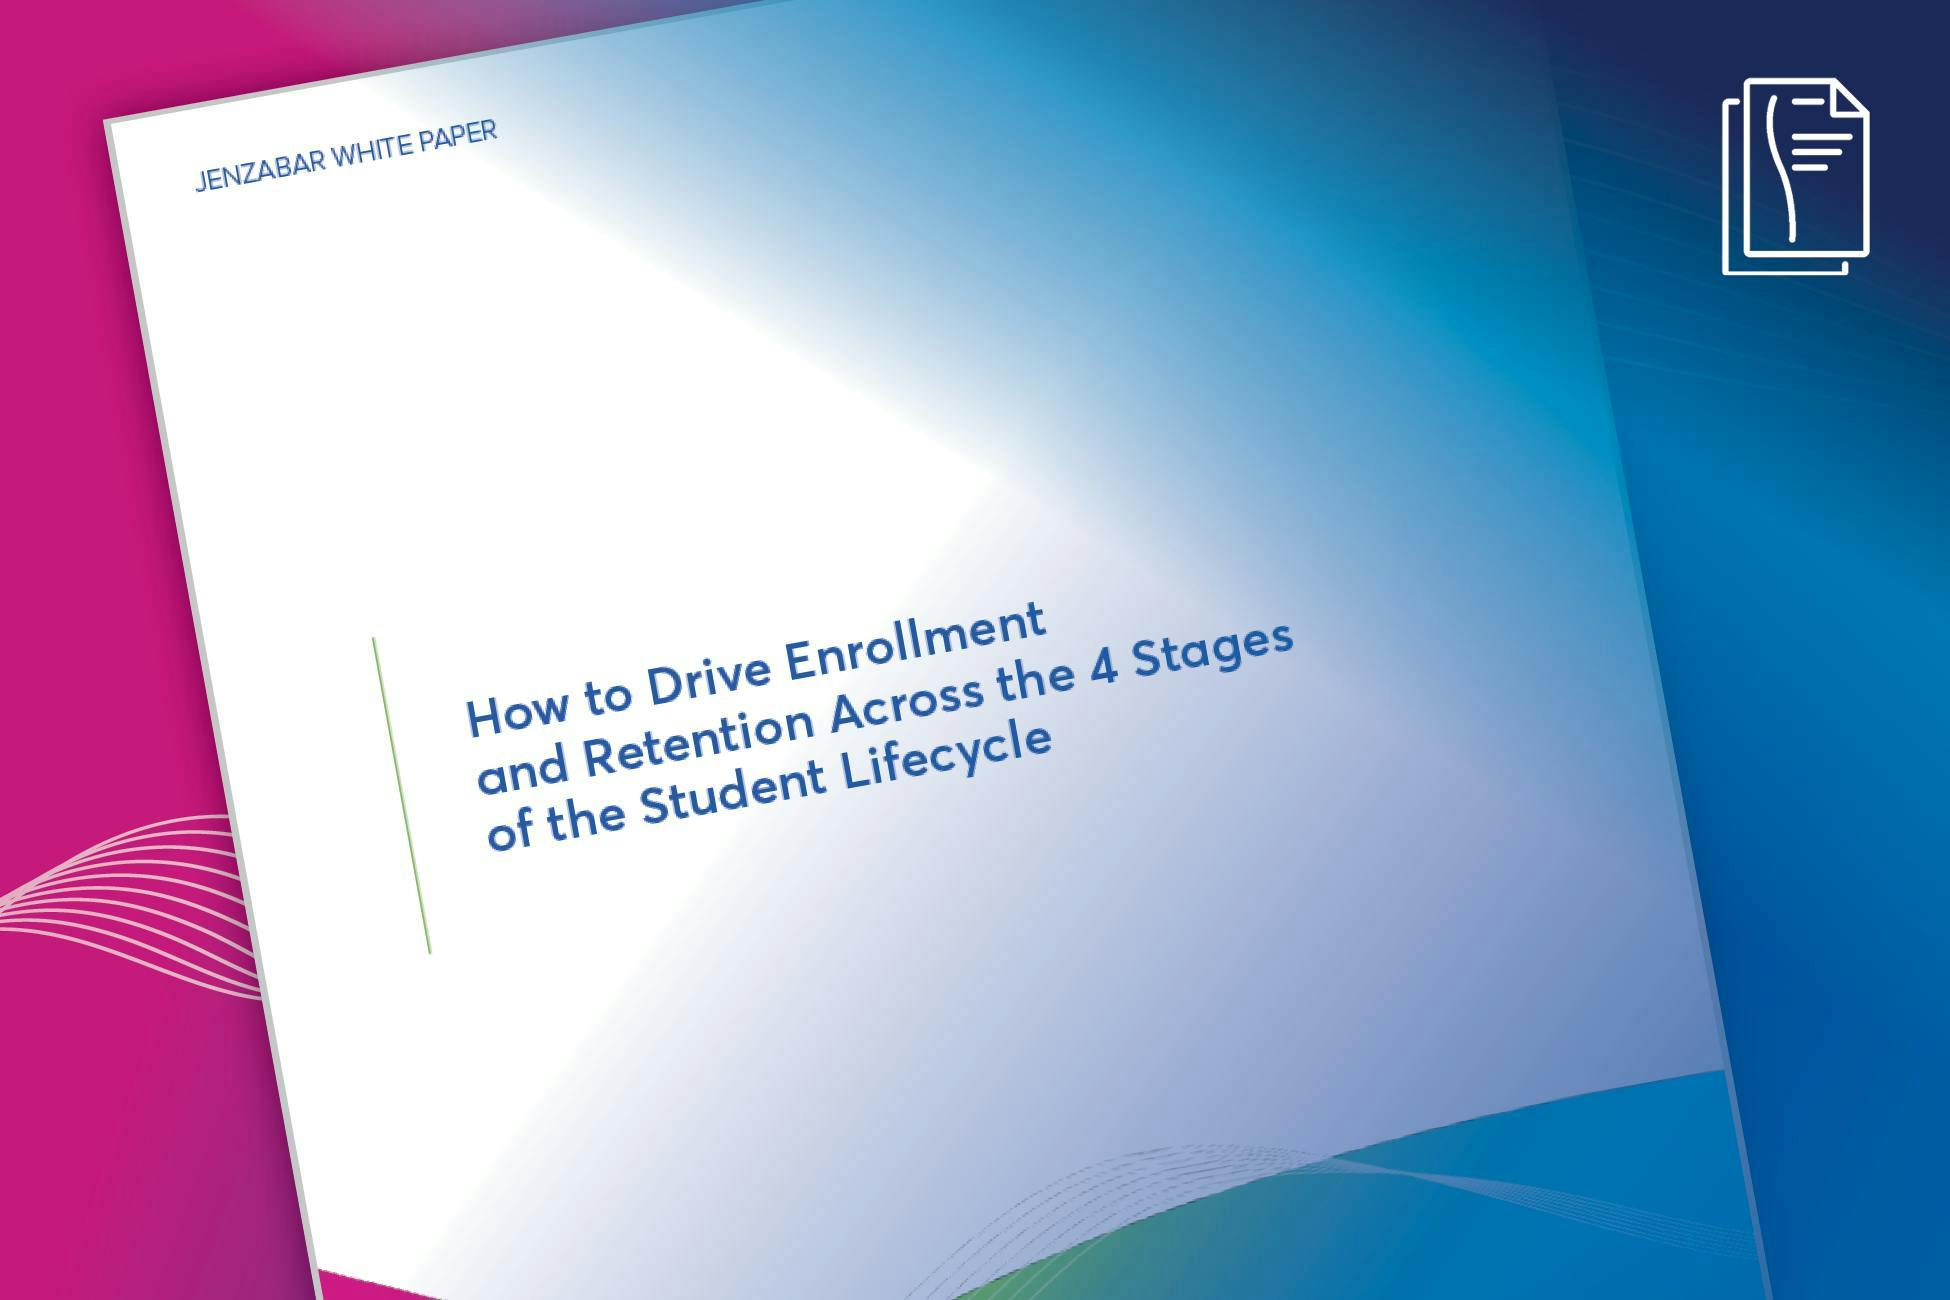 How to Drive Enrollment and Retention Across the 4 Stages of the Student Lifecycle